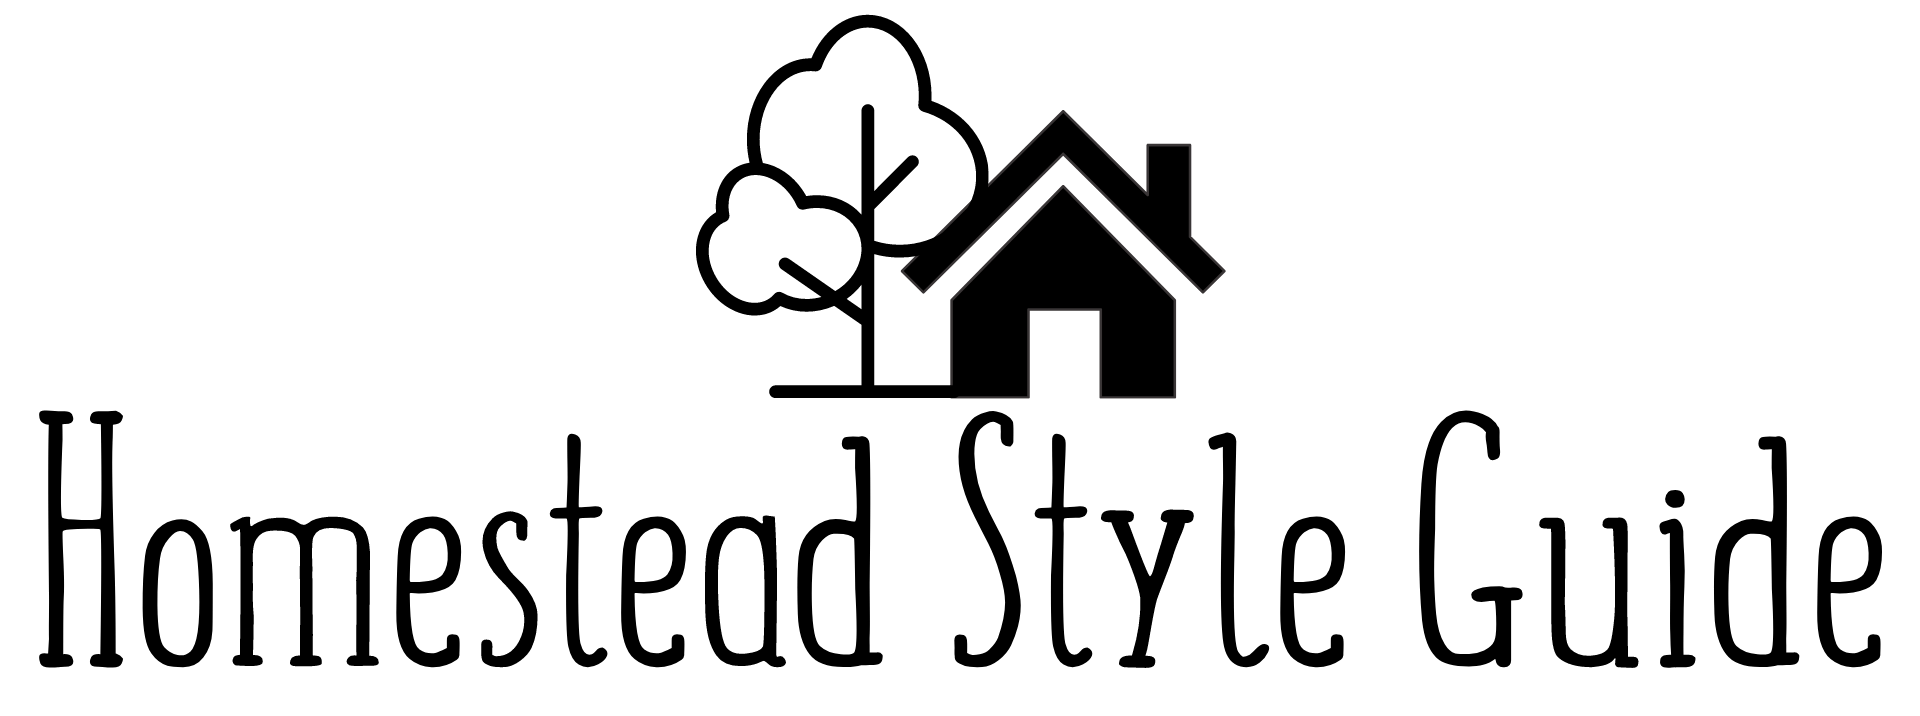 Homestead Style Guide